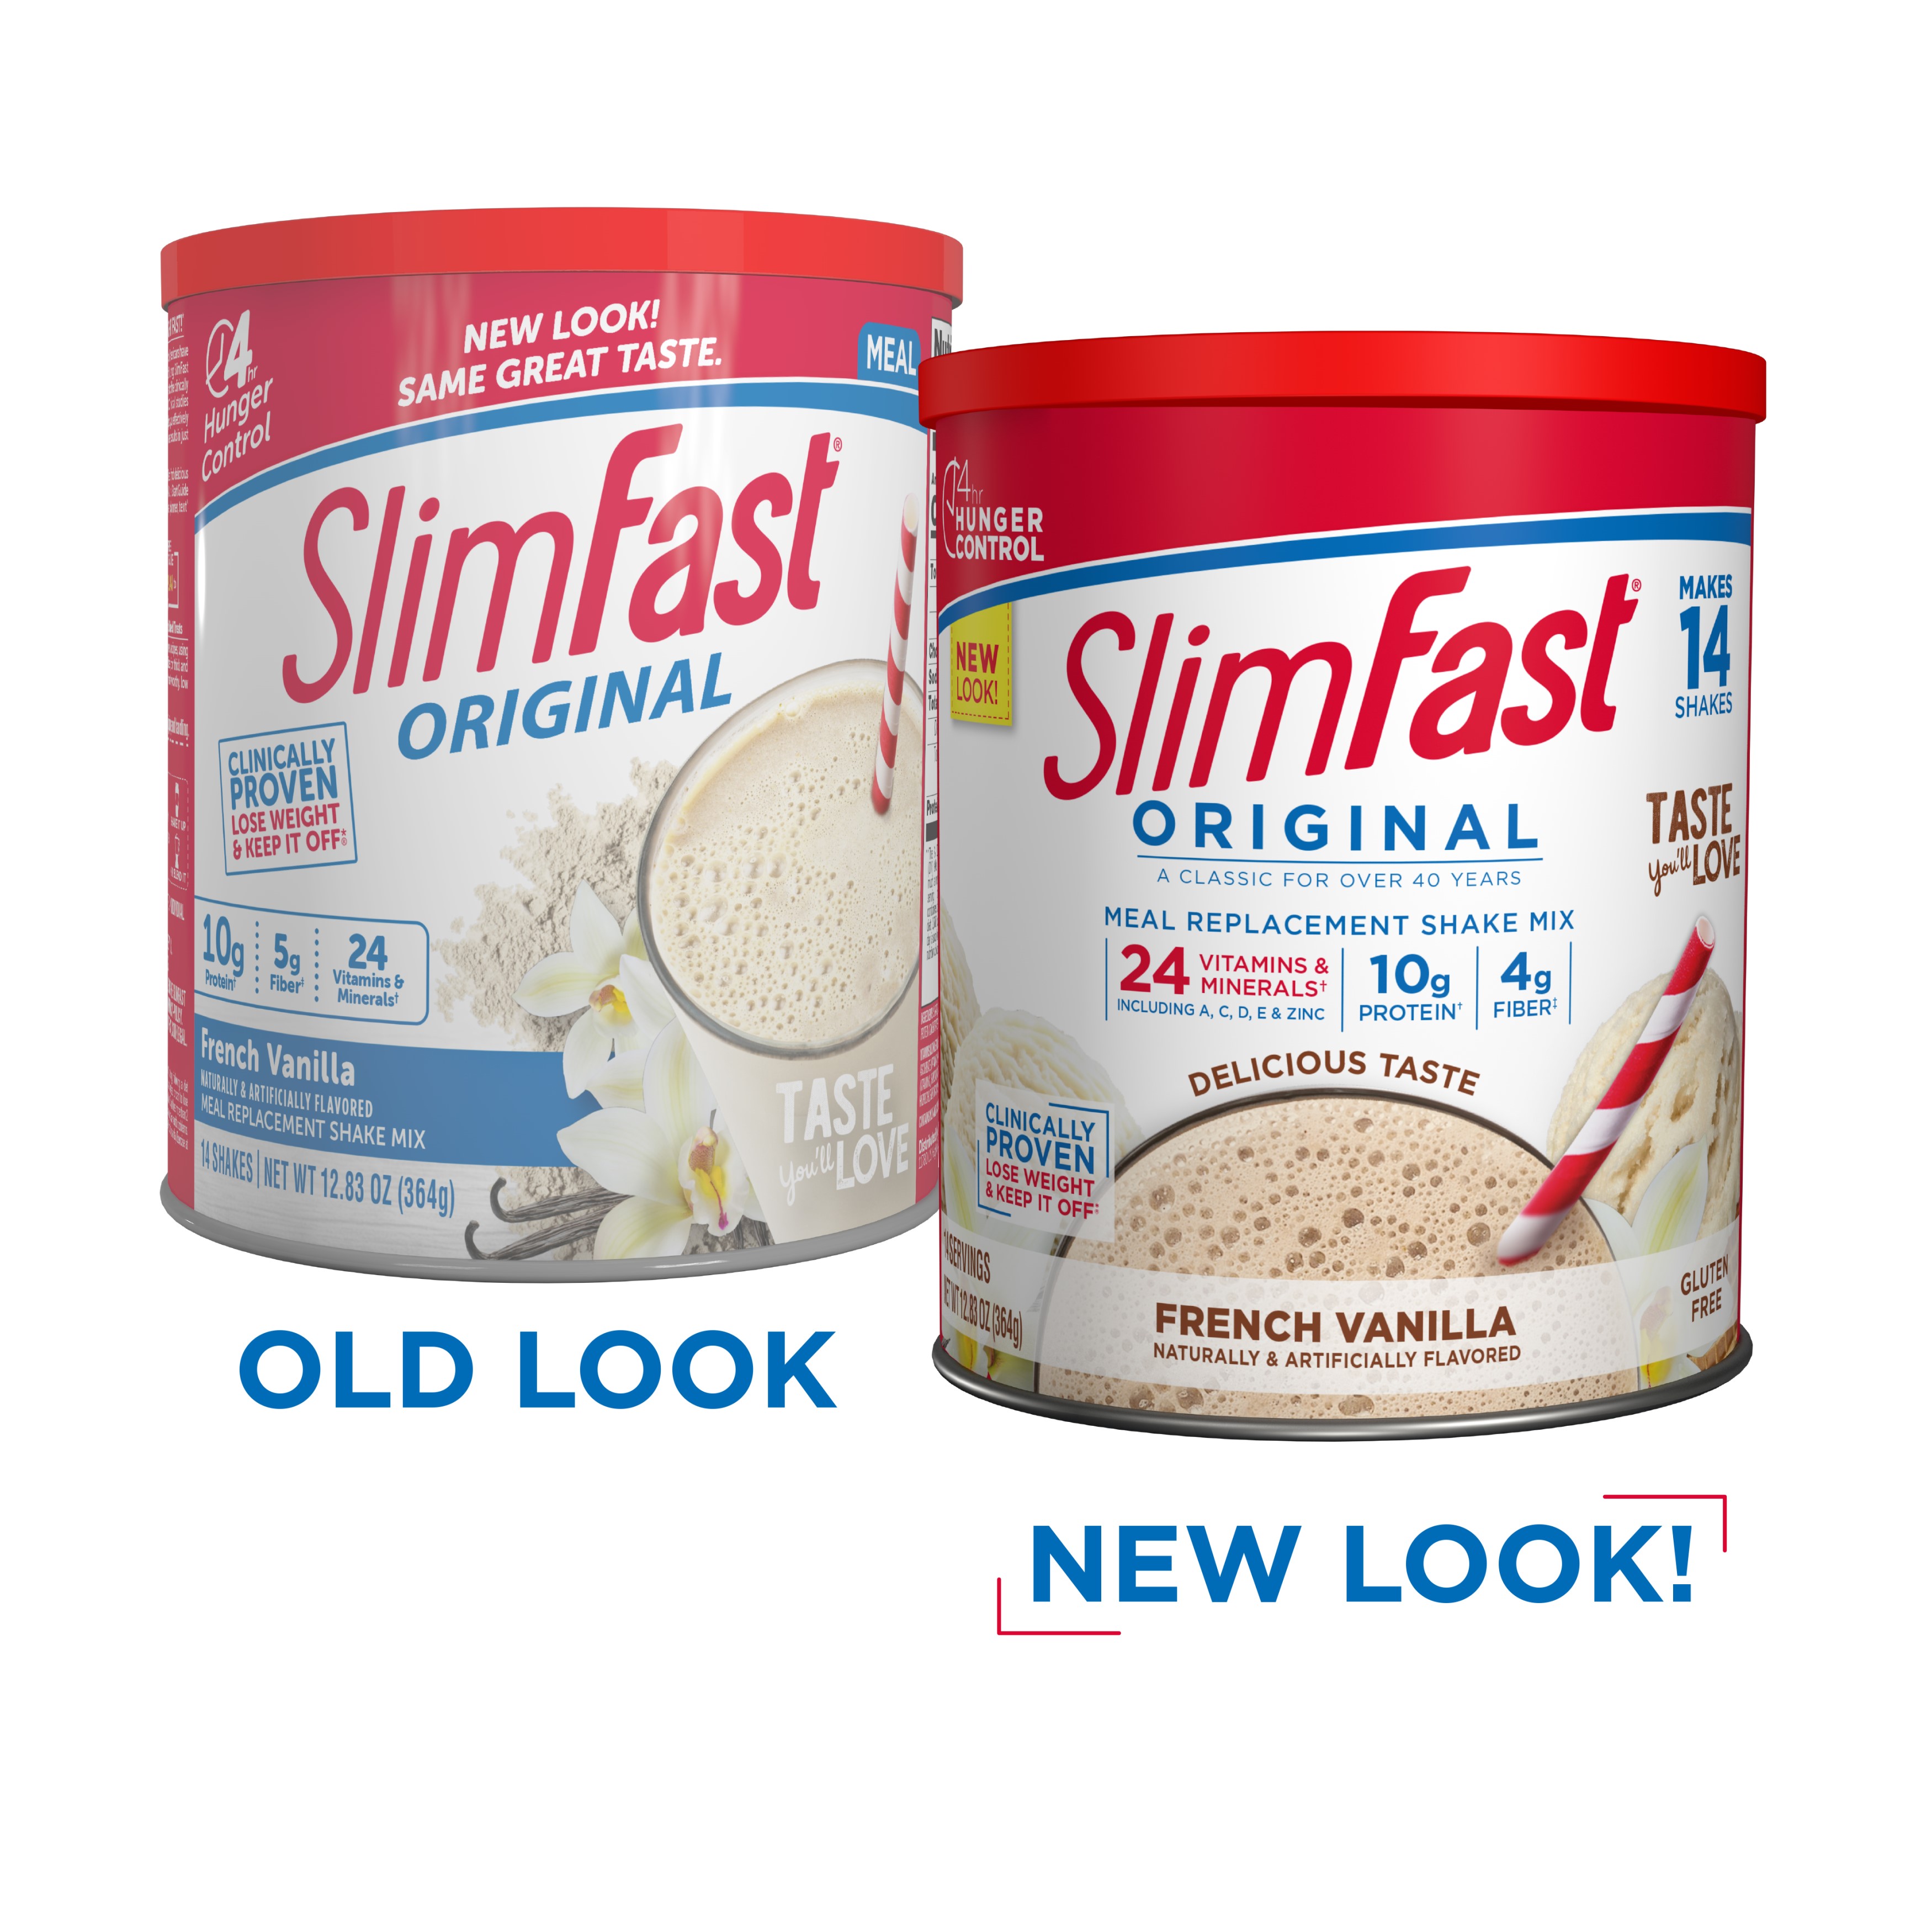 SlimFast Original Meal Replacement Shake Powder, French Vanilla, 12.83 oz, 14 servings - image 5 of 6